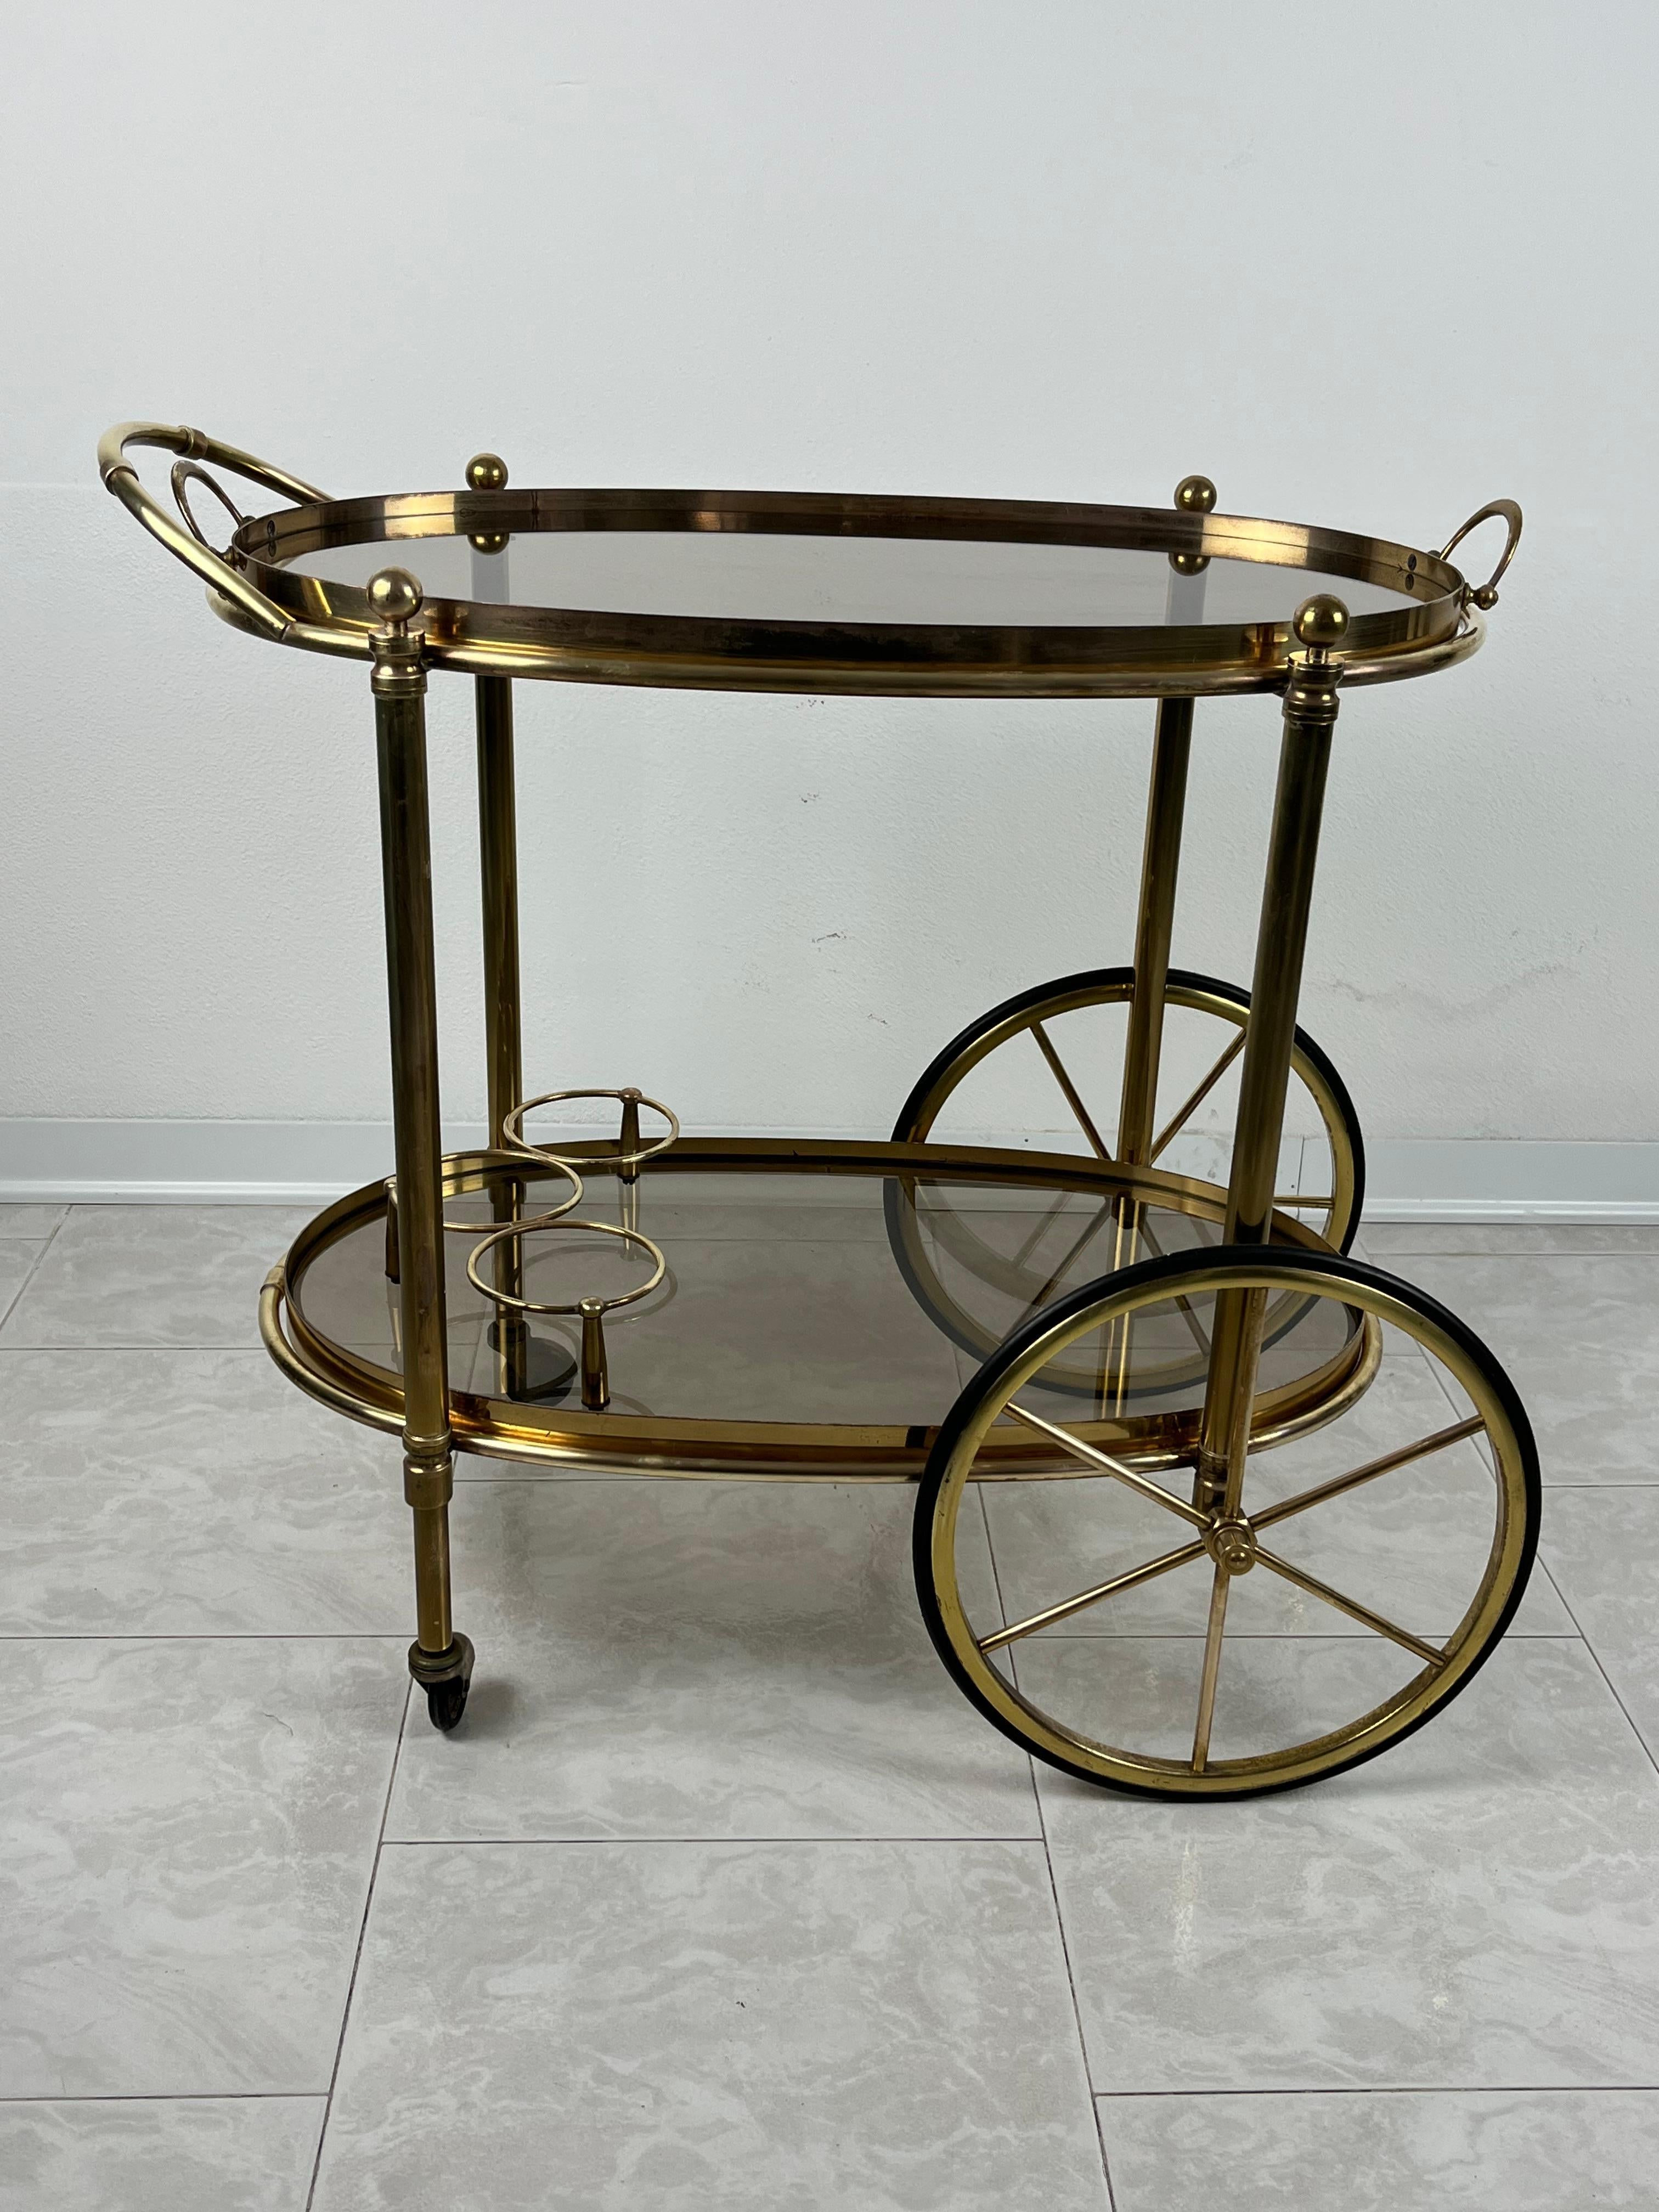 Oval Brass Bar Trolley  with Smoked Glass, Made in Italy, 1960s.
It has always belonged to my family and was bought by my great-grandfather.
The brass shows normal signs of ageing. The peculiarity of this trolley is that the upper part becomes a